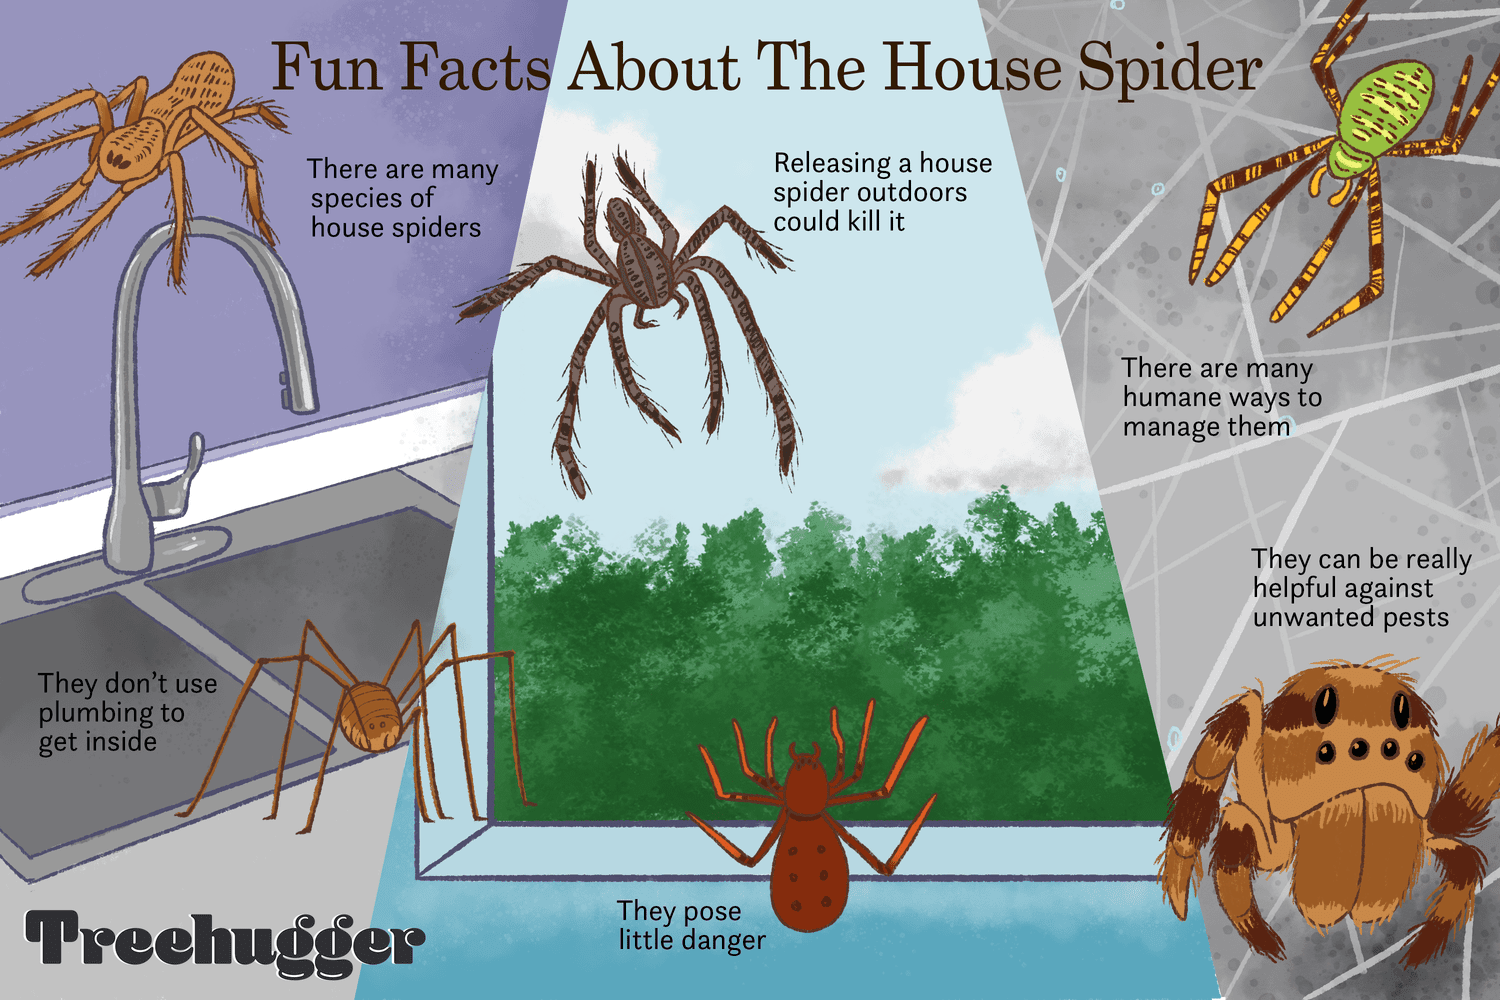 What are the Benefits of Having Spiders in Your House?